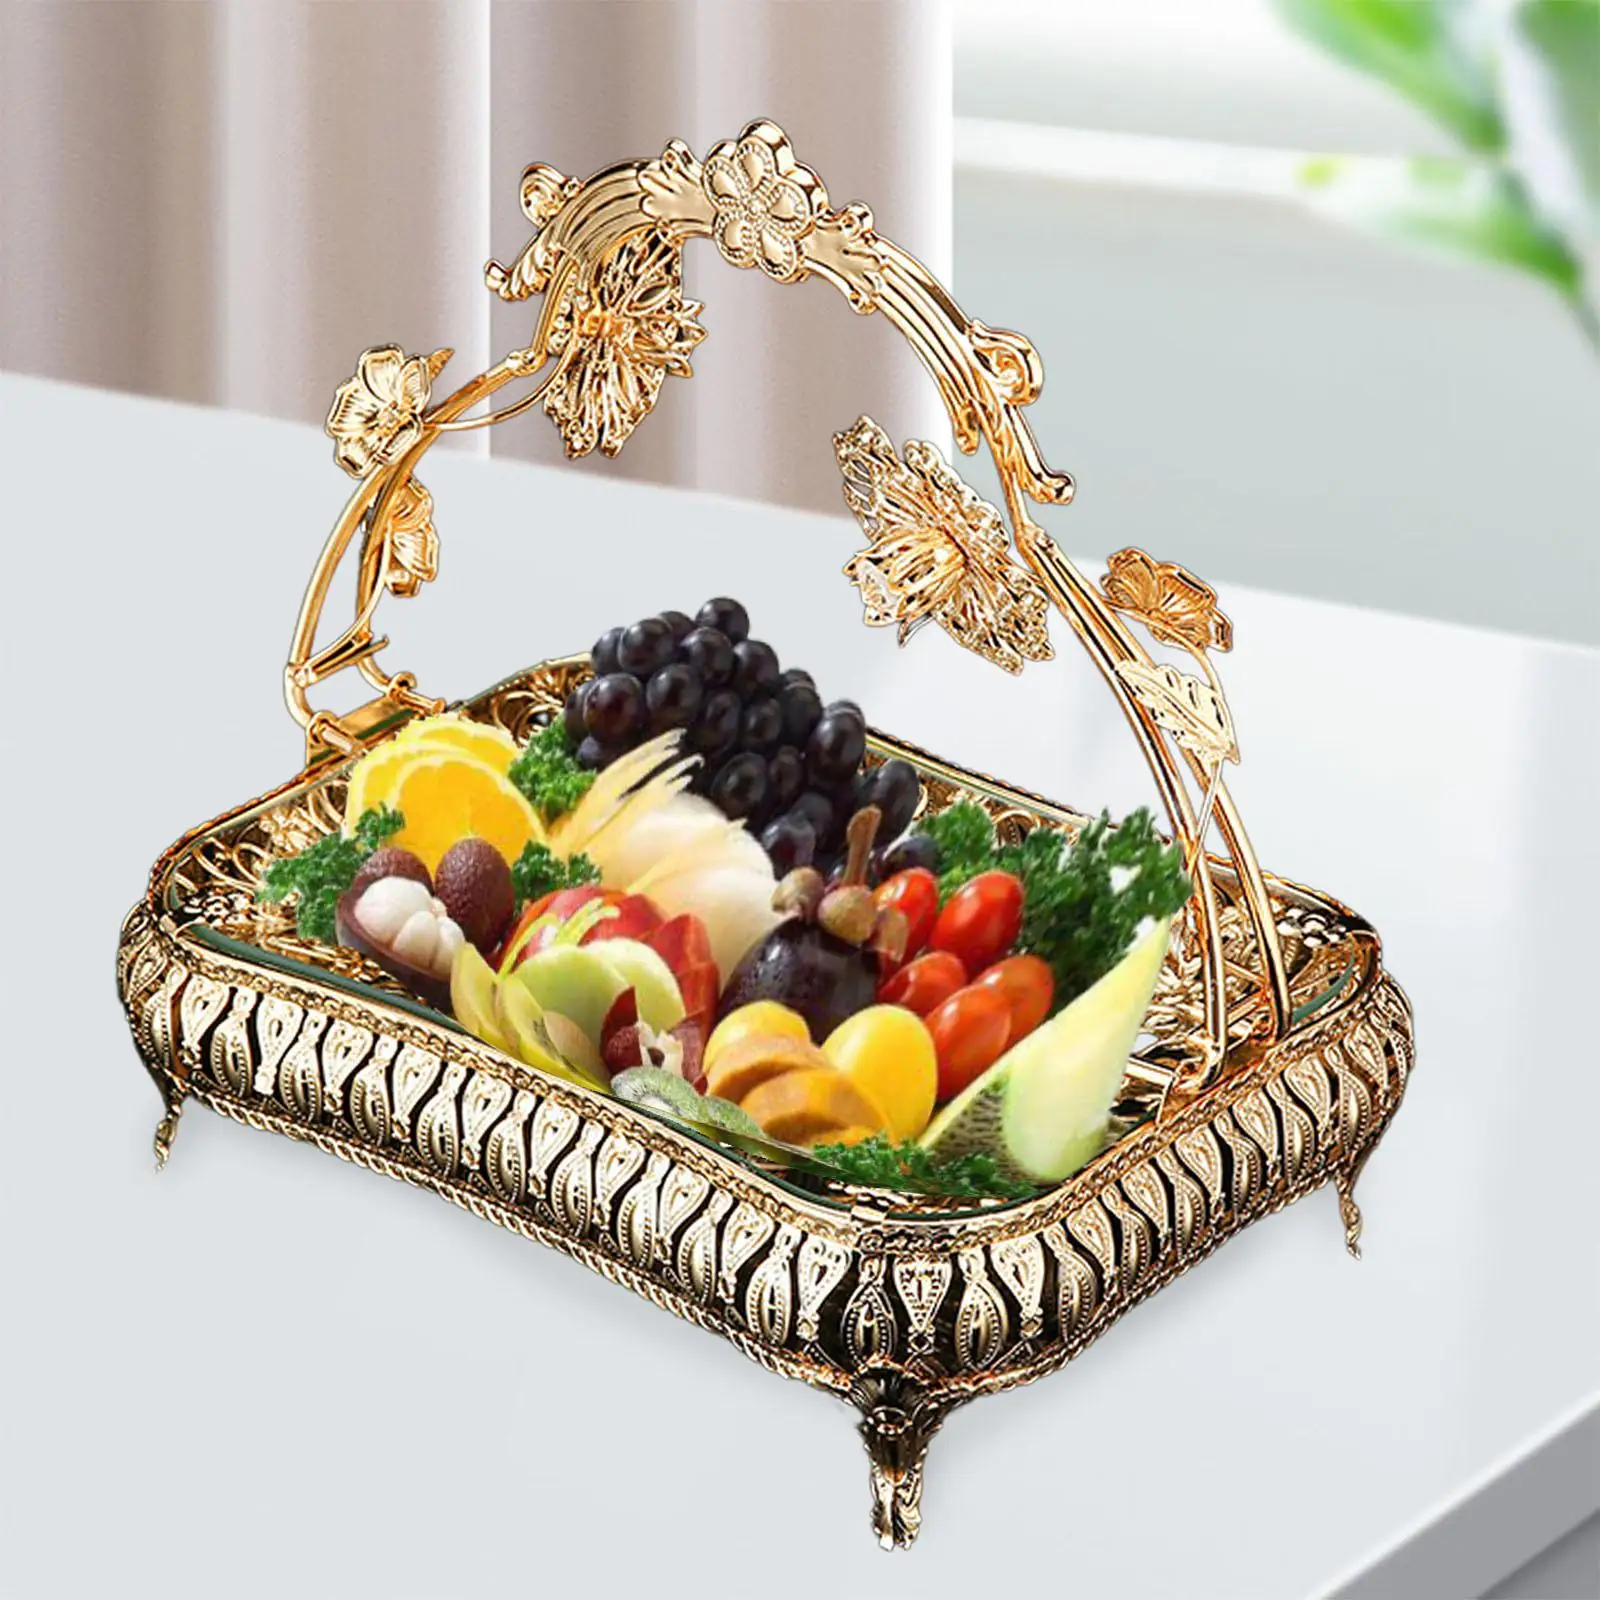 Luxury Fruits Serving Tray Cupcake Stand Dessert Tray Food Storage Container for Wedding Farmhouse Holiday Countertop Desktop